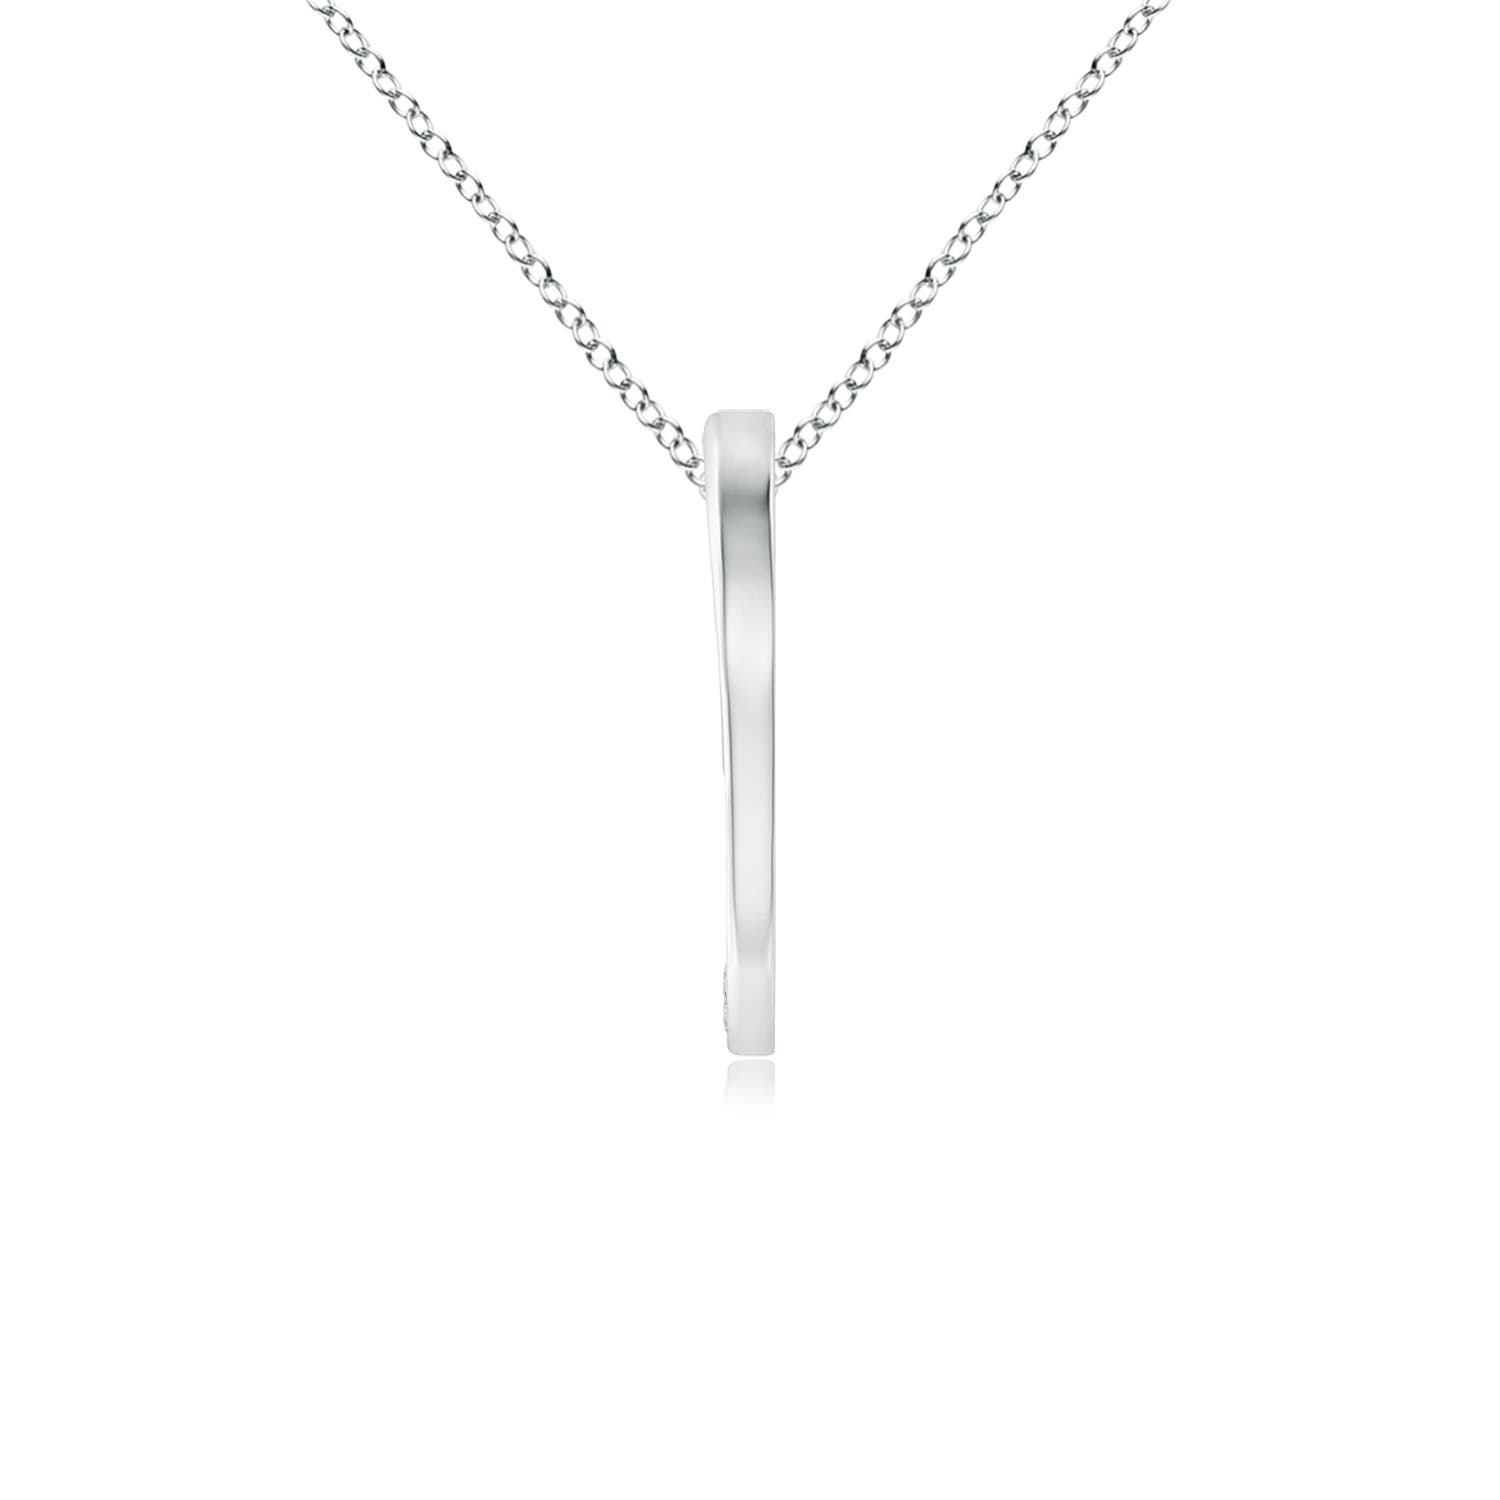 H, SI2 / 0.13 CT / 14 KT White Gold